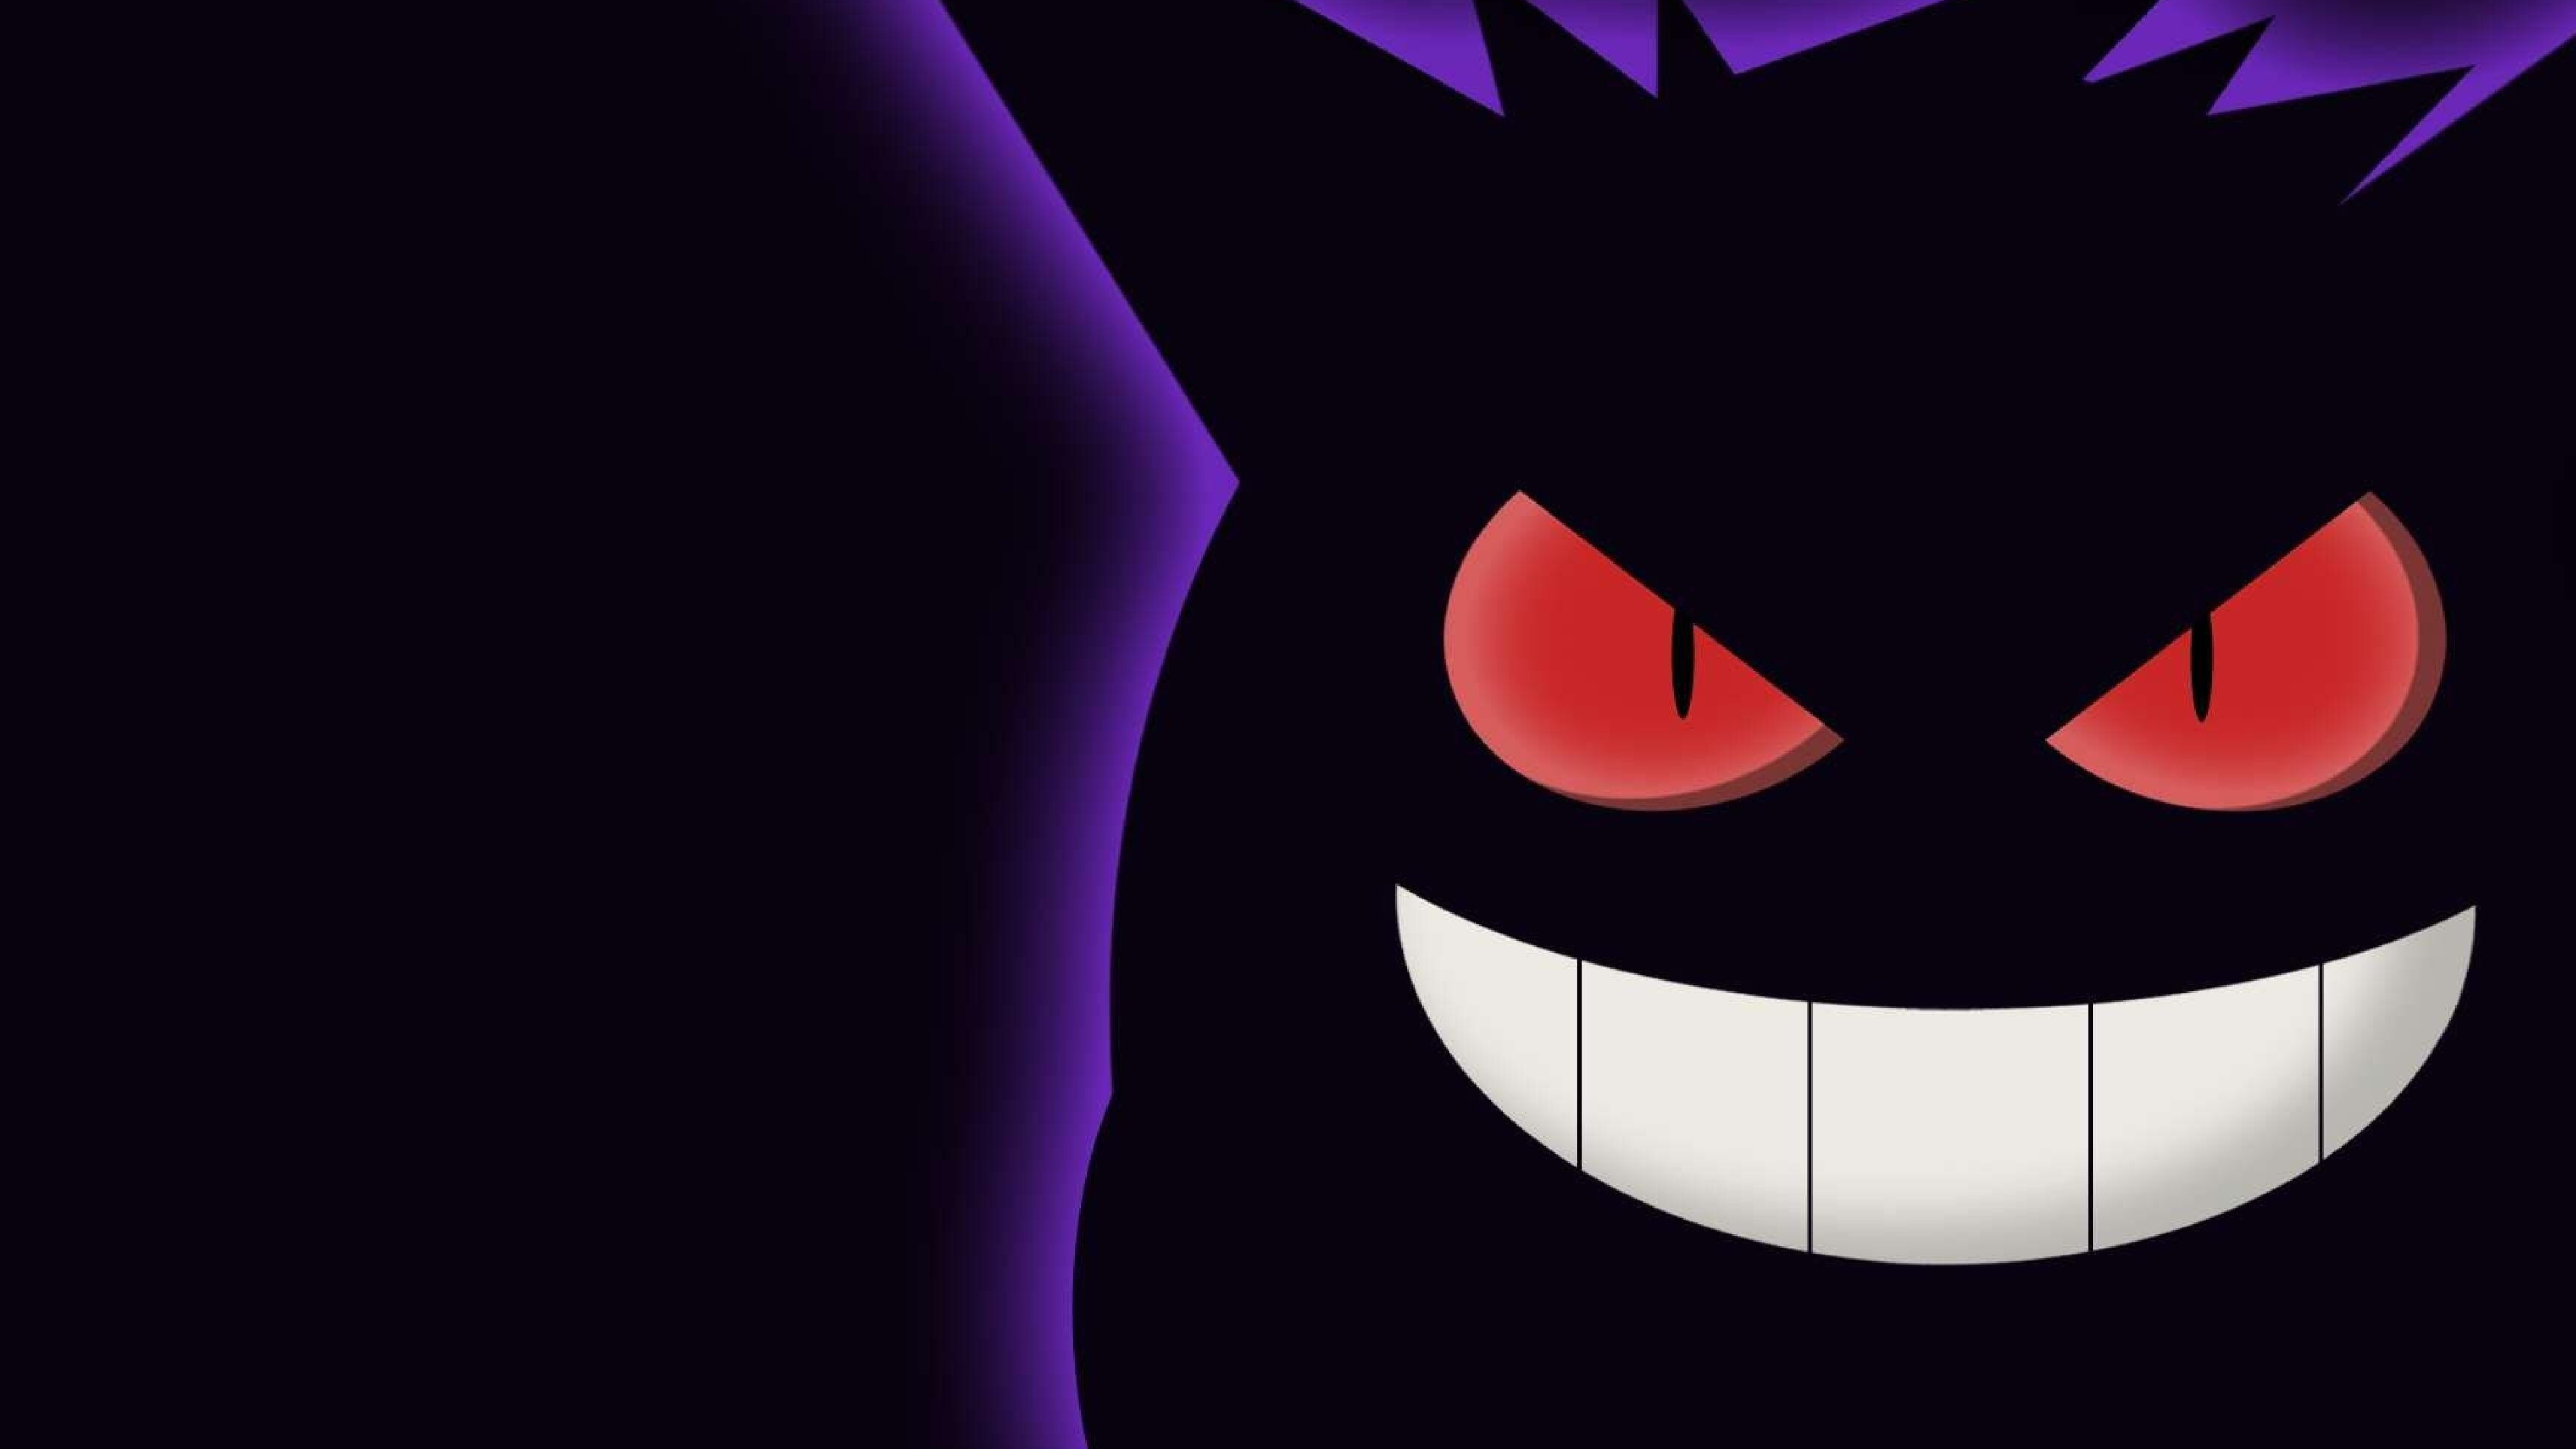 Gengar: Pokemon with the ability to hide perfectly in the shadow of any object, Body acting as a heat sink. 3840x2160 4K Background.